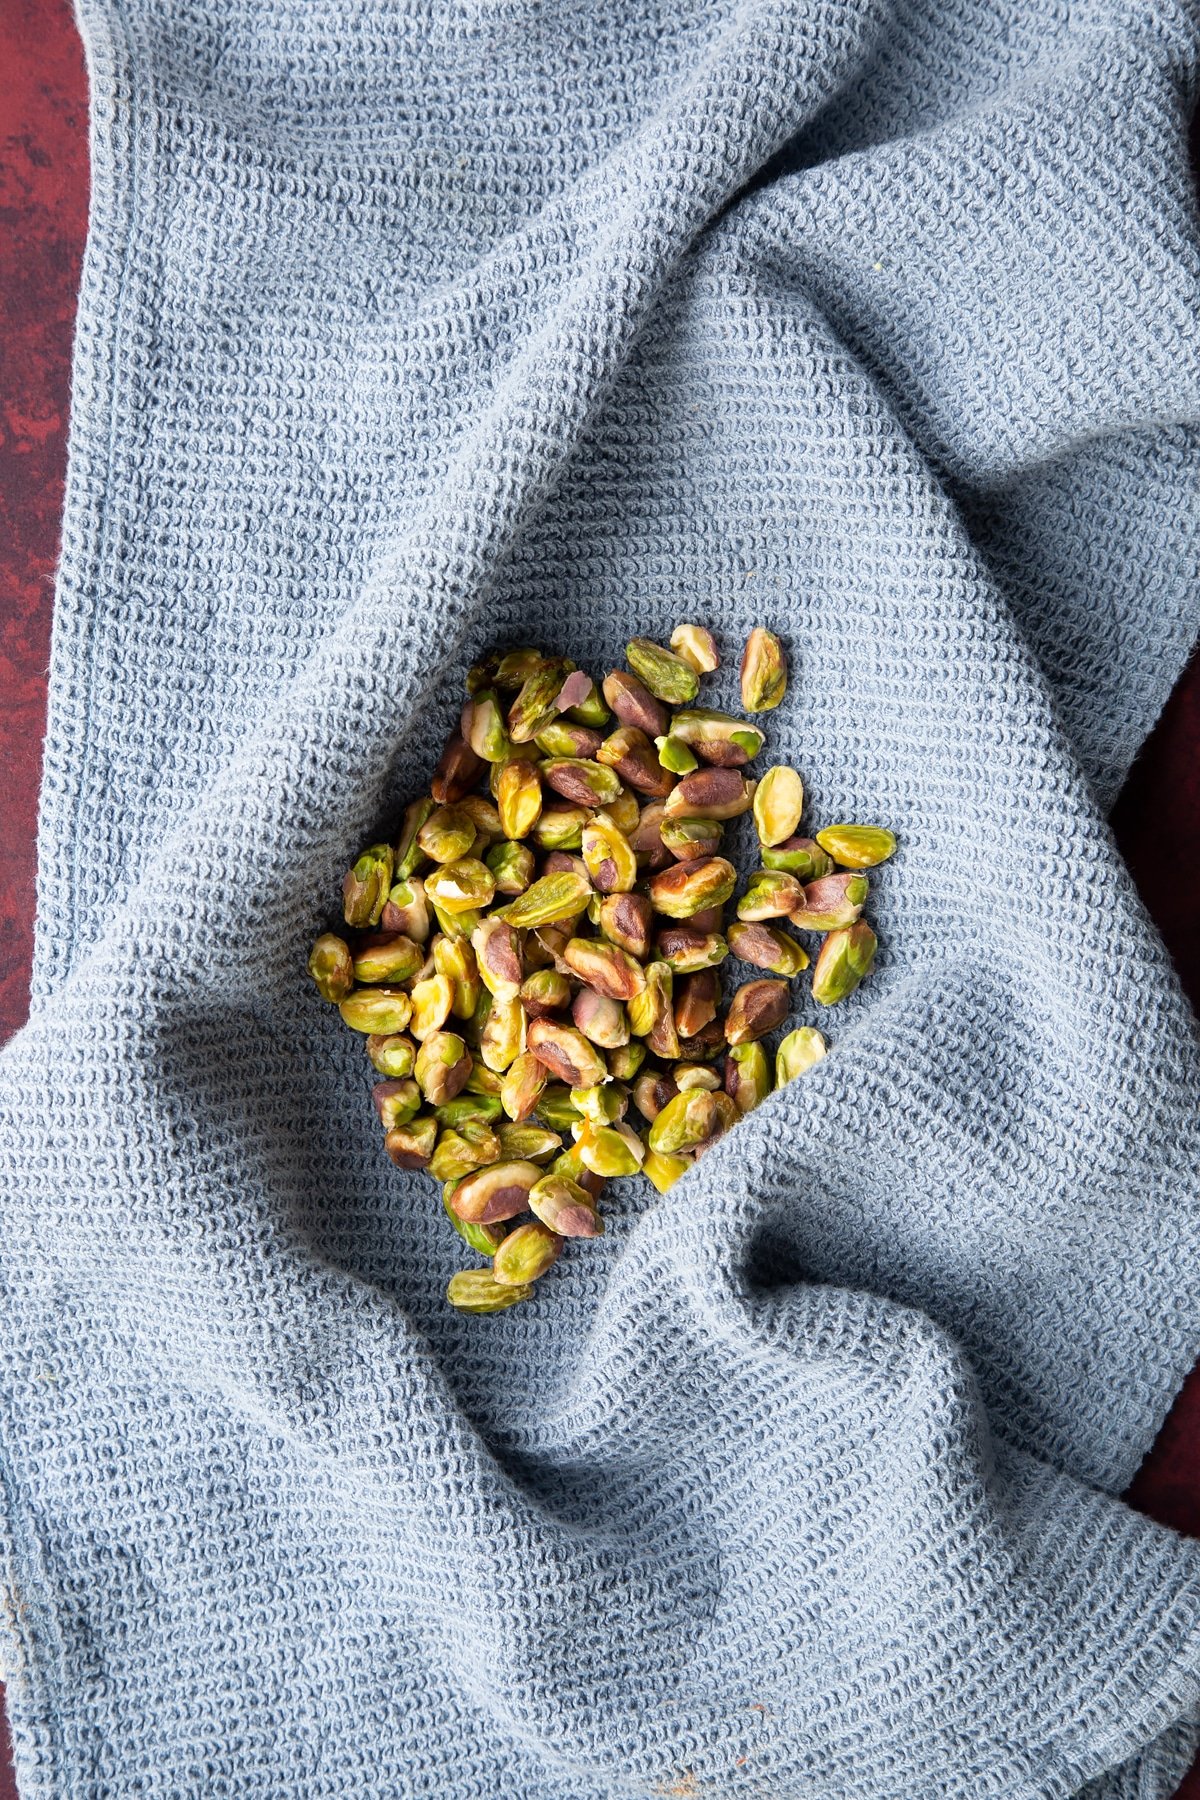 Overhead shot of a handful of pistachio on a towel.